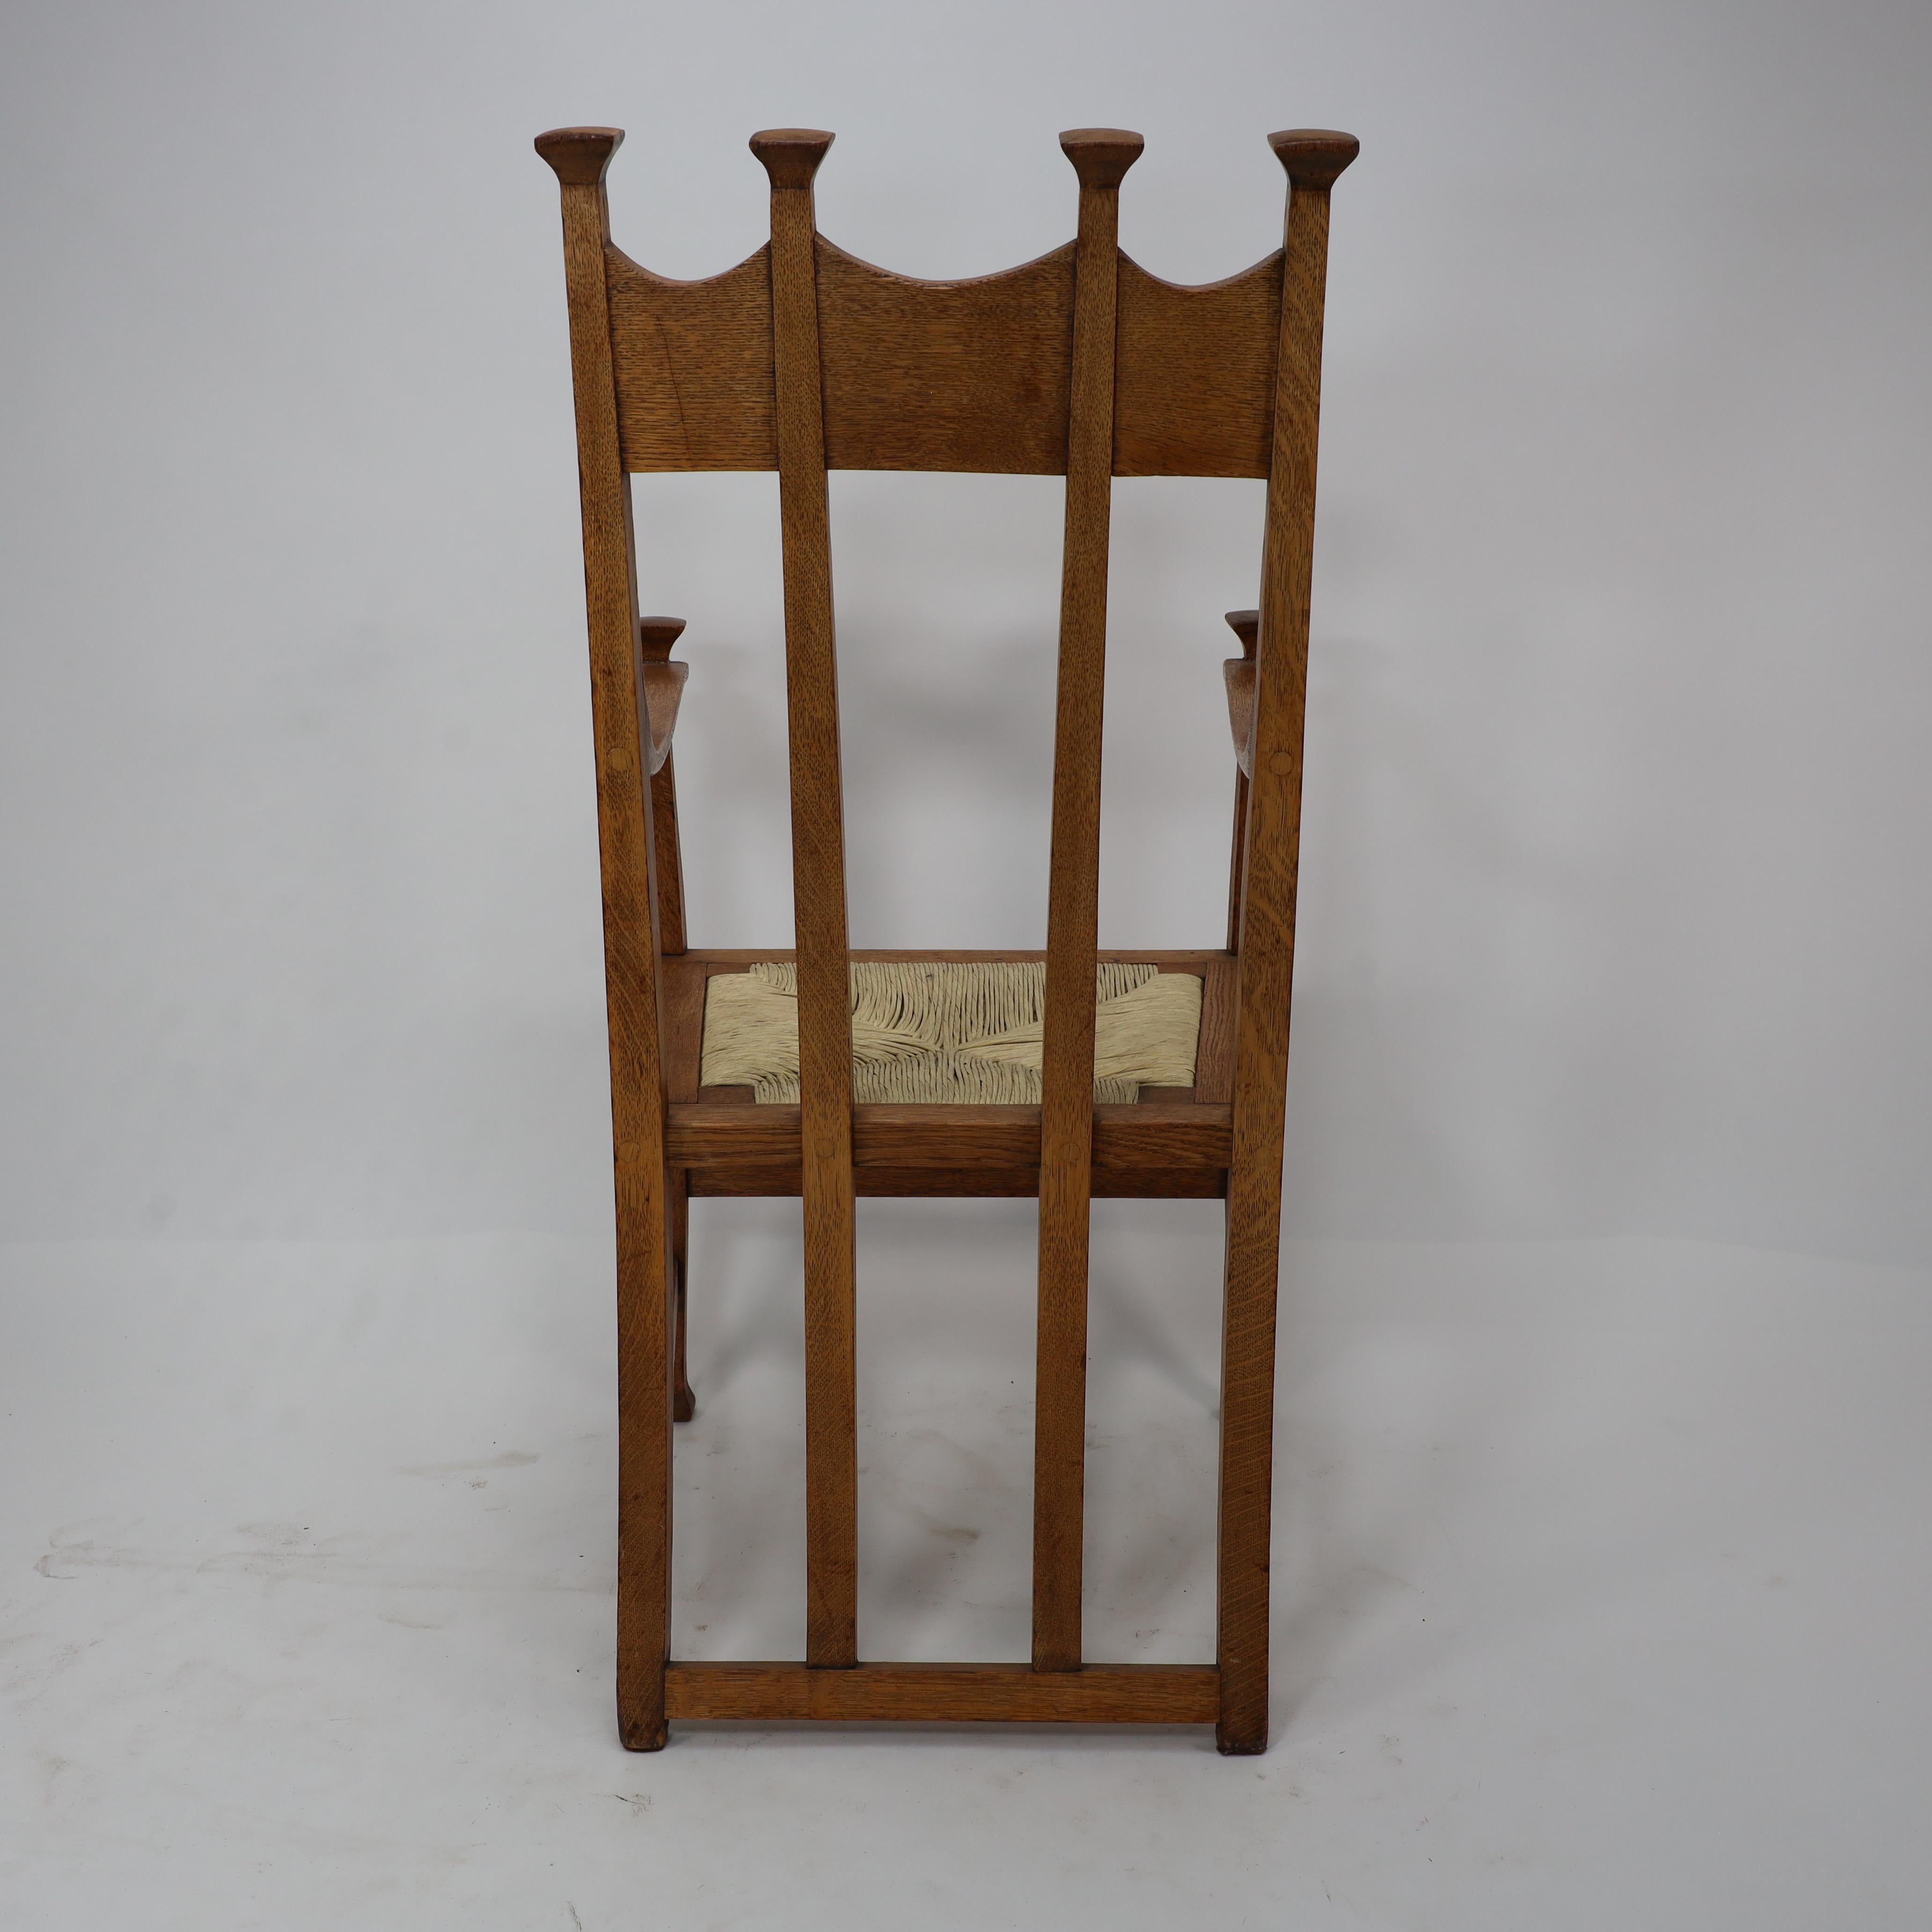 J S Henry Arts & Crafts oak dining chair with throne like caps & a sweeping back For Sale 5